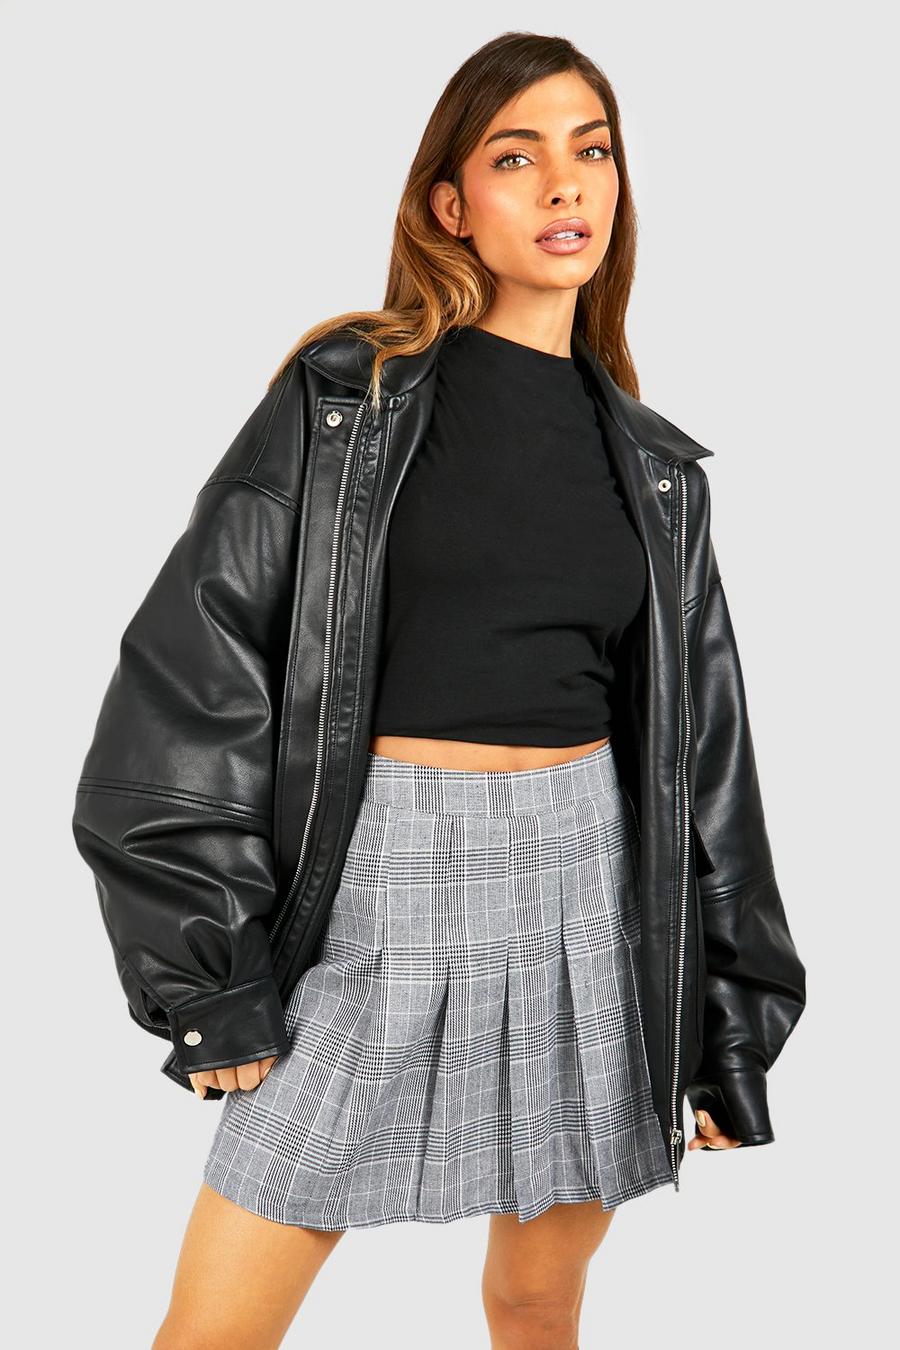 Charcoal grigio Woven Check Pleated Tennis Skirt